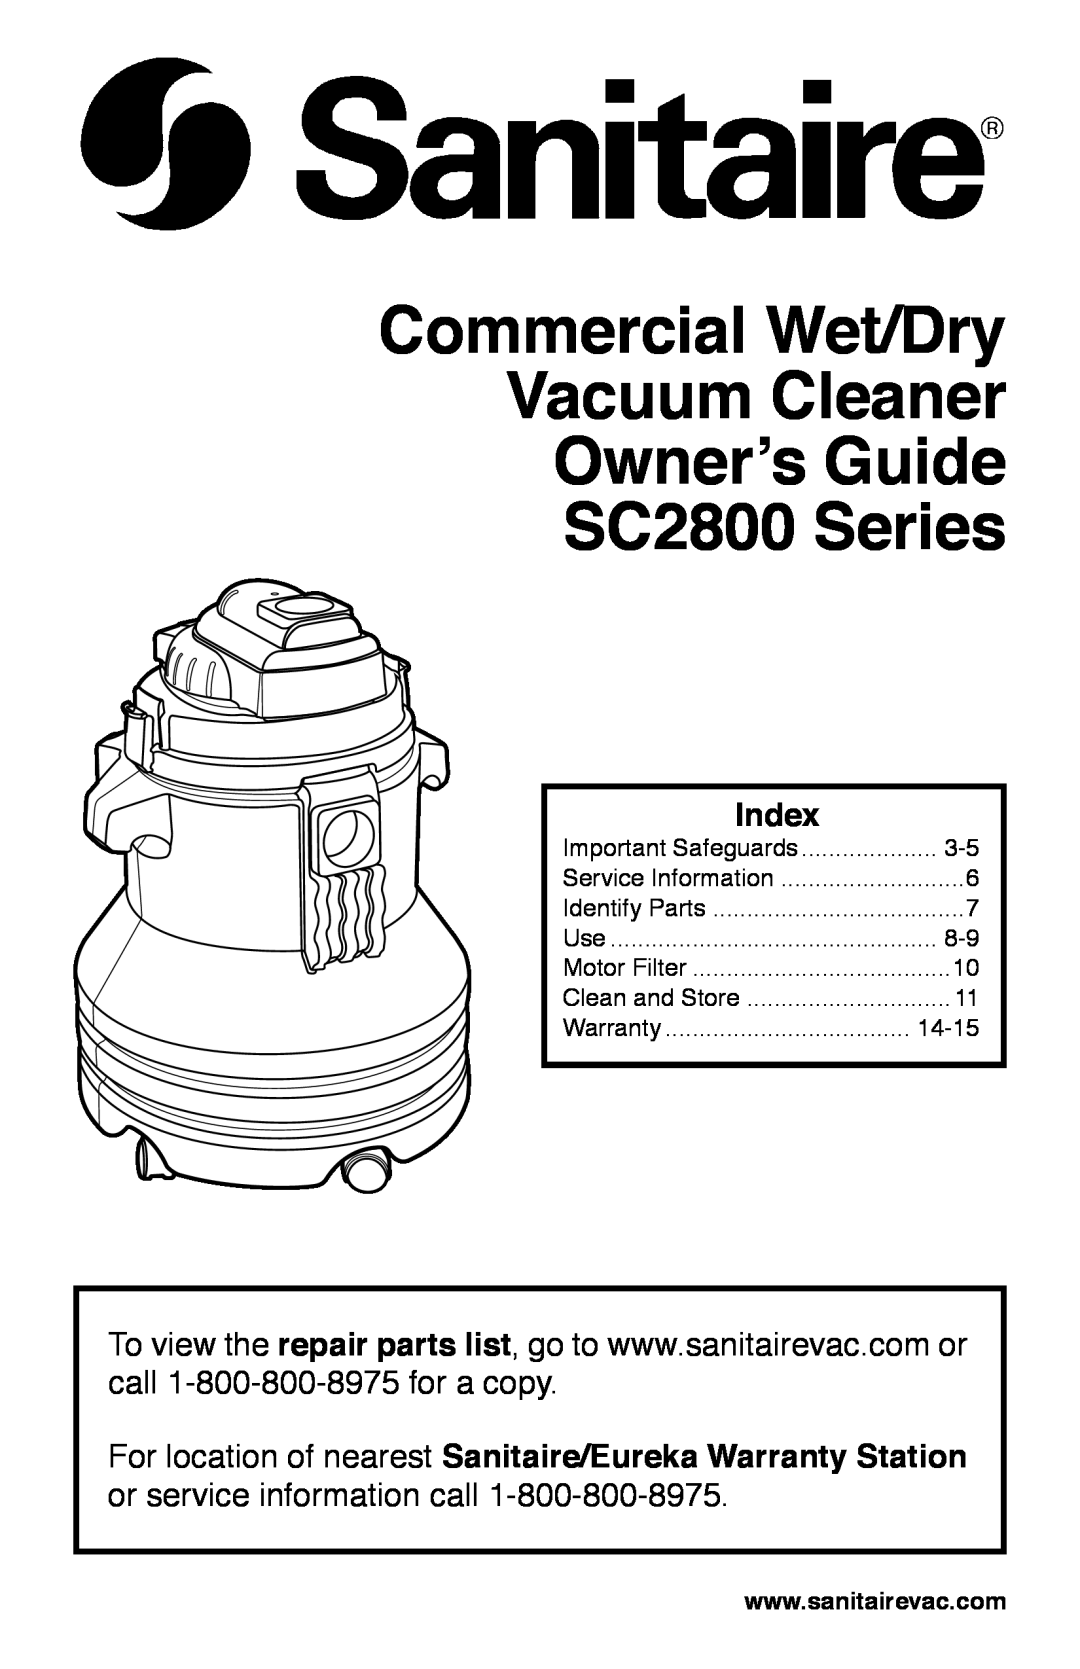 Sanitaire warranty Index, Commercial Wet/Dry Vacuum Cleaner Ownerʼs Guide, SC2800 Series 